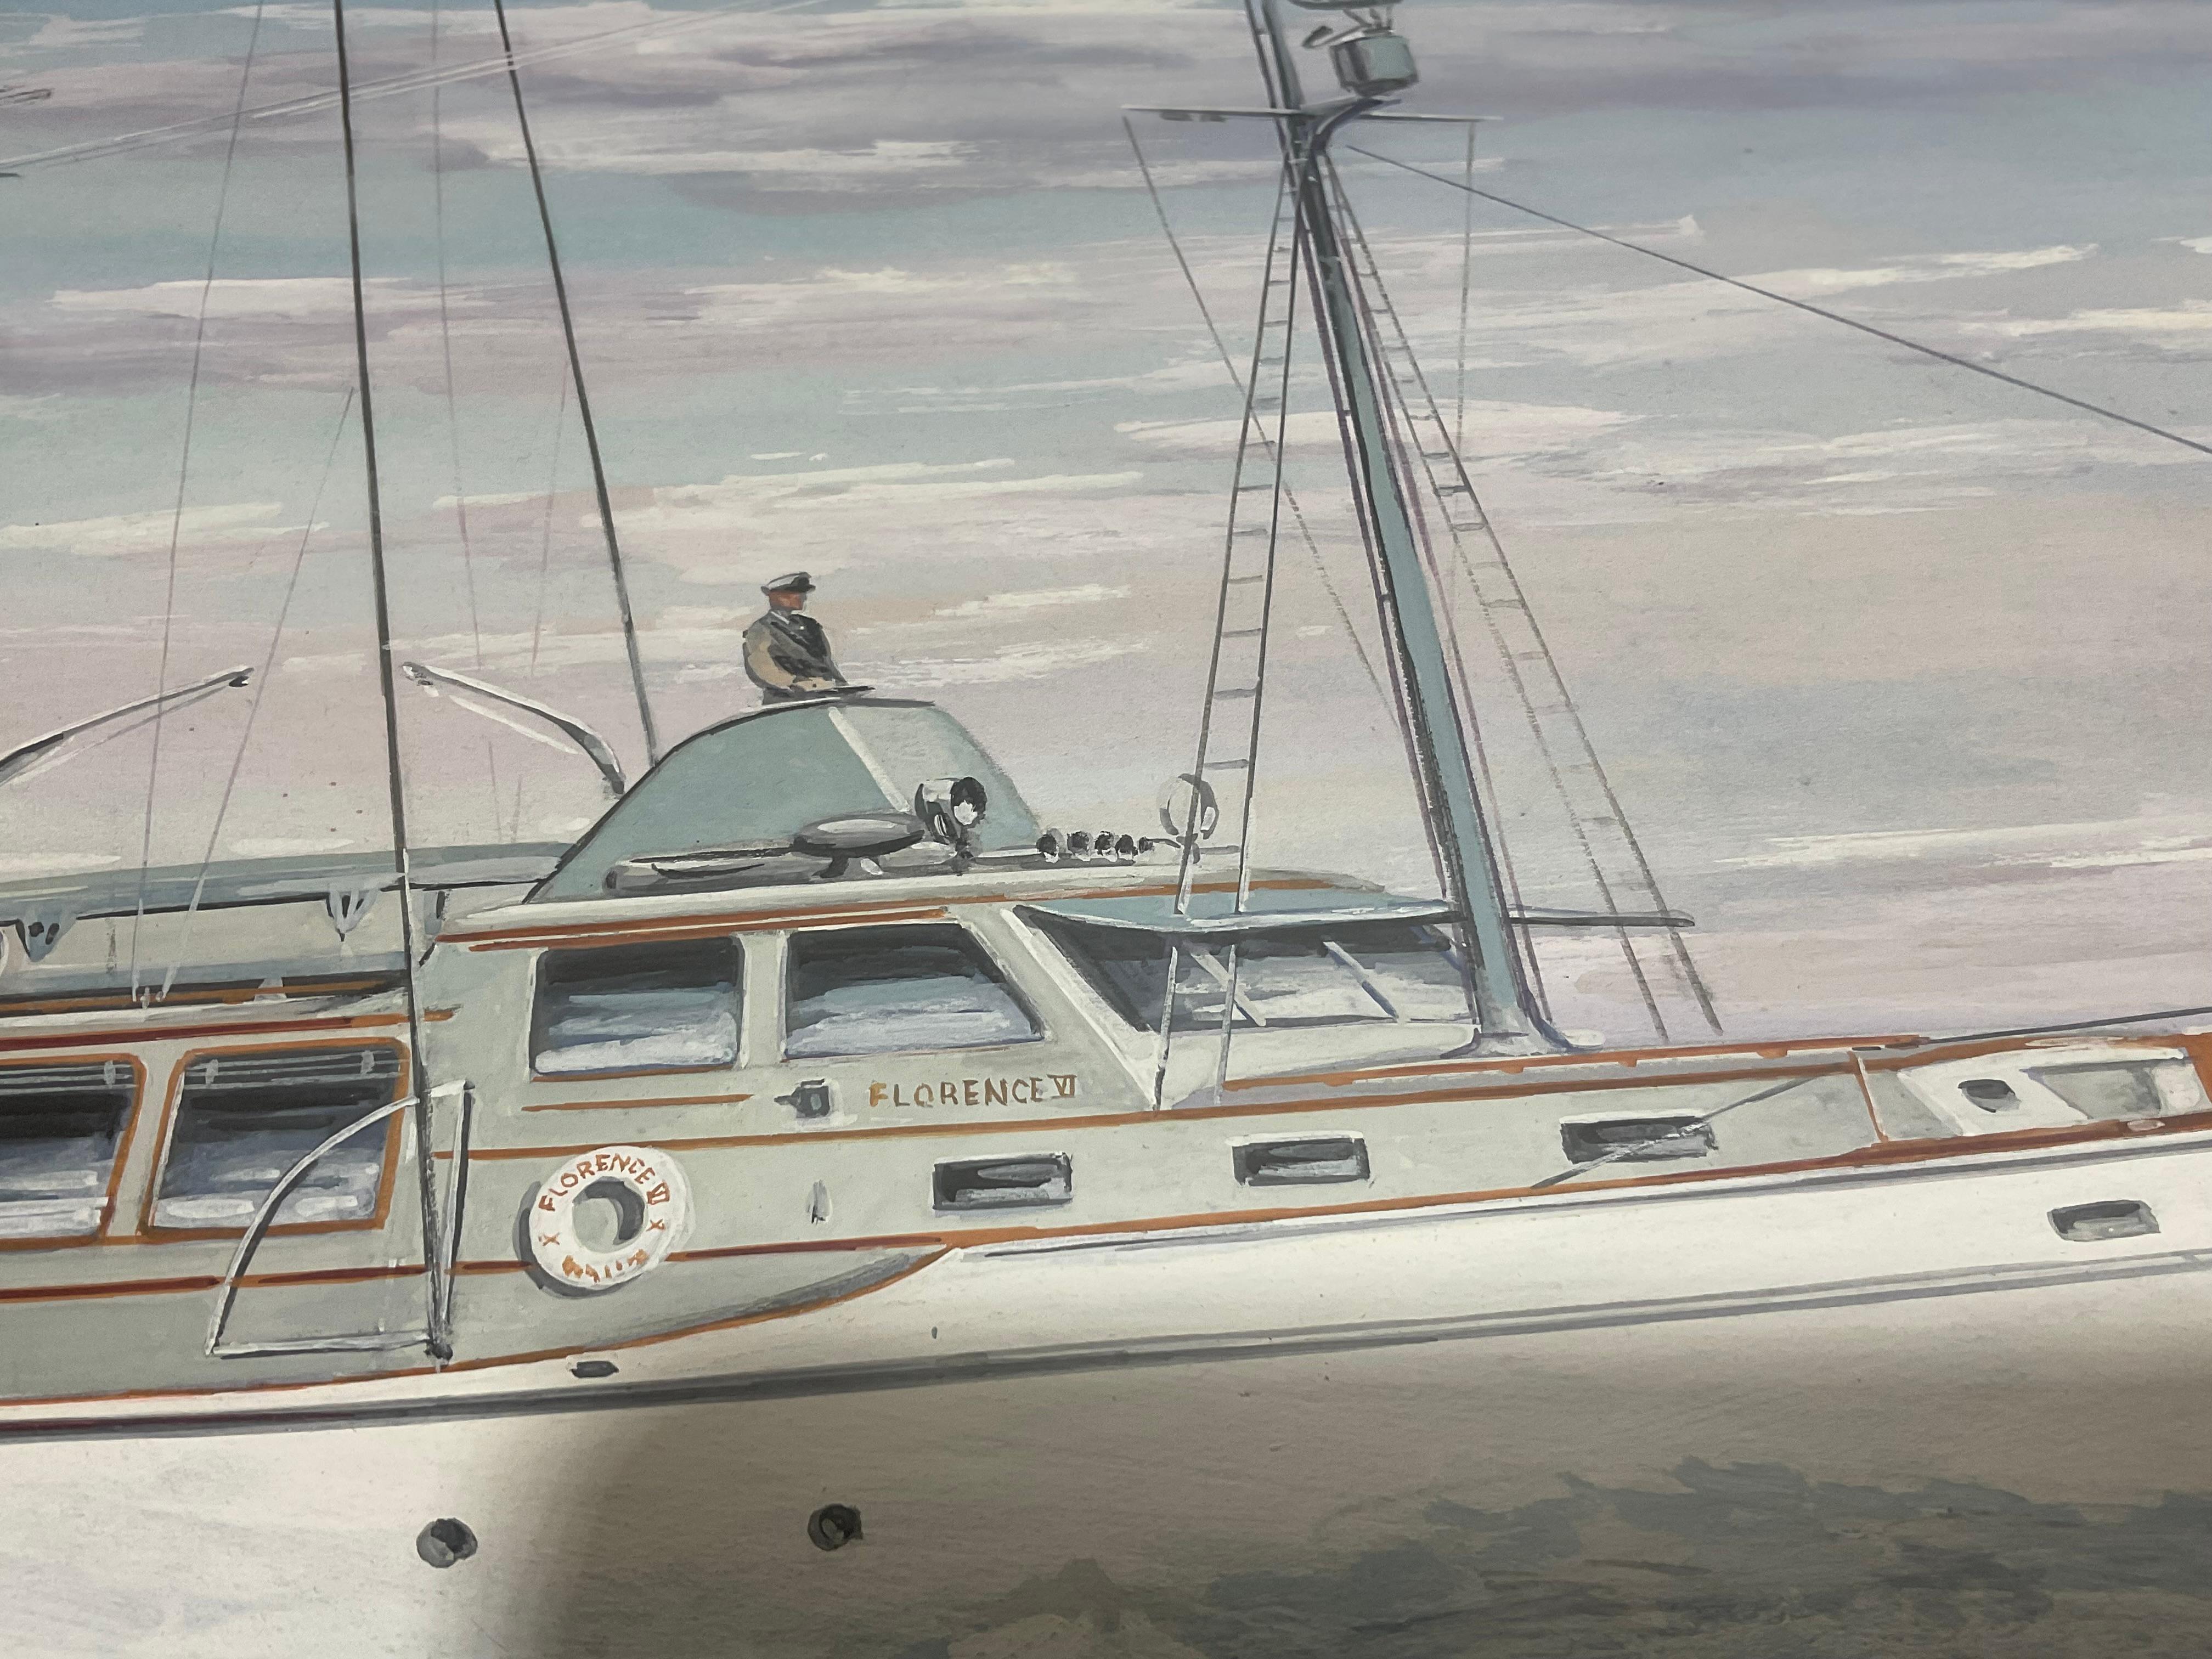 Canvas Sportfishing Boat Painting By John Austin Taylor For Sale